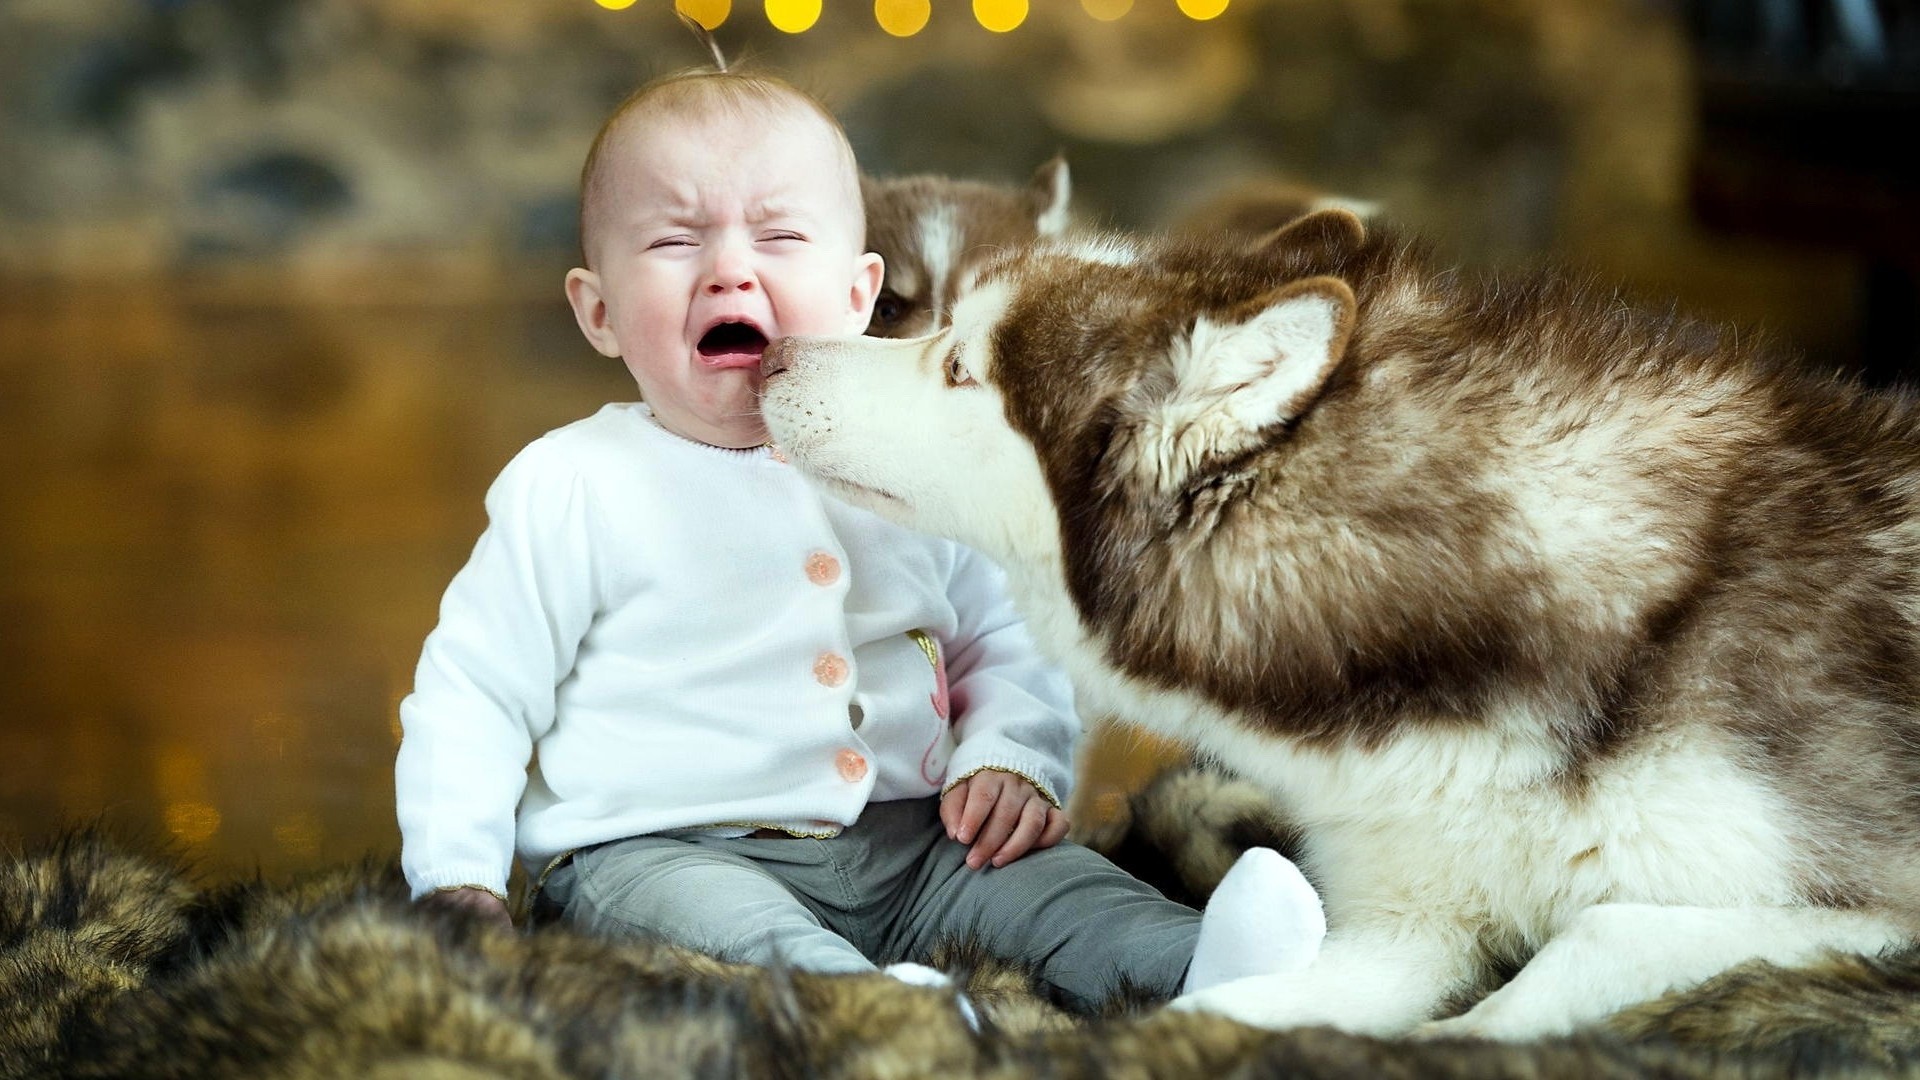 Cute Crying Baby With Dog Wallpaper HD